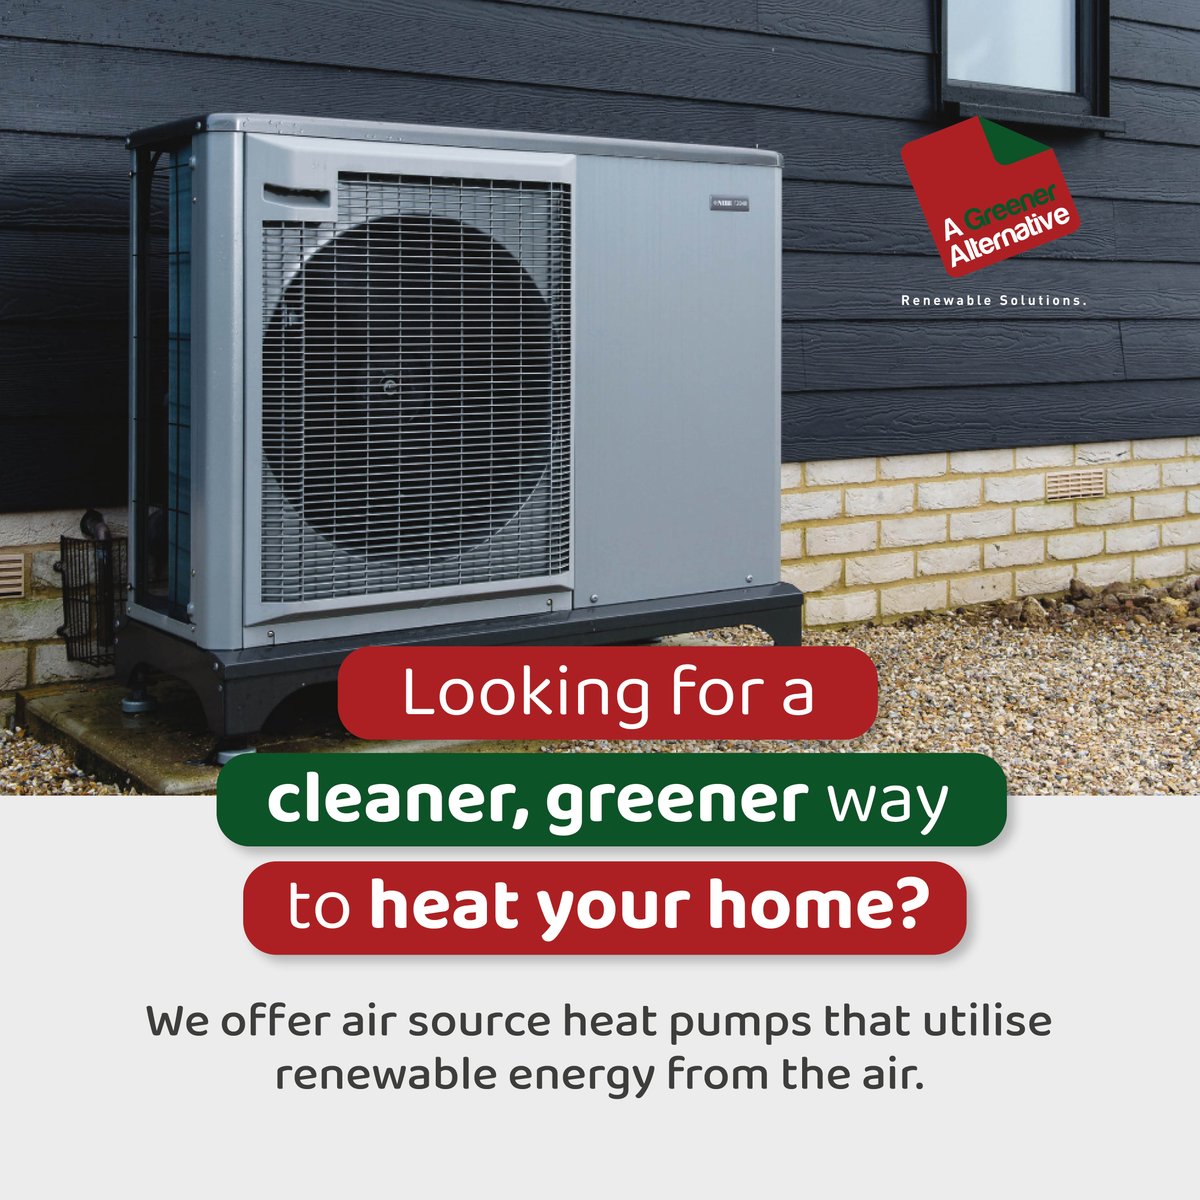 Looking for a cleaner, greener way to heat your home? 🌱🏠
We offer air source heat pumps that utilise renewable energy from the air, providing hot water and heating with minimal environmental impact.

#AGreenerAlternative #GreenLiving #GoGreen #GreenHomes